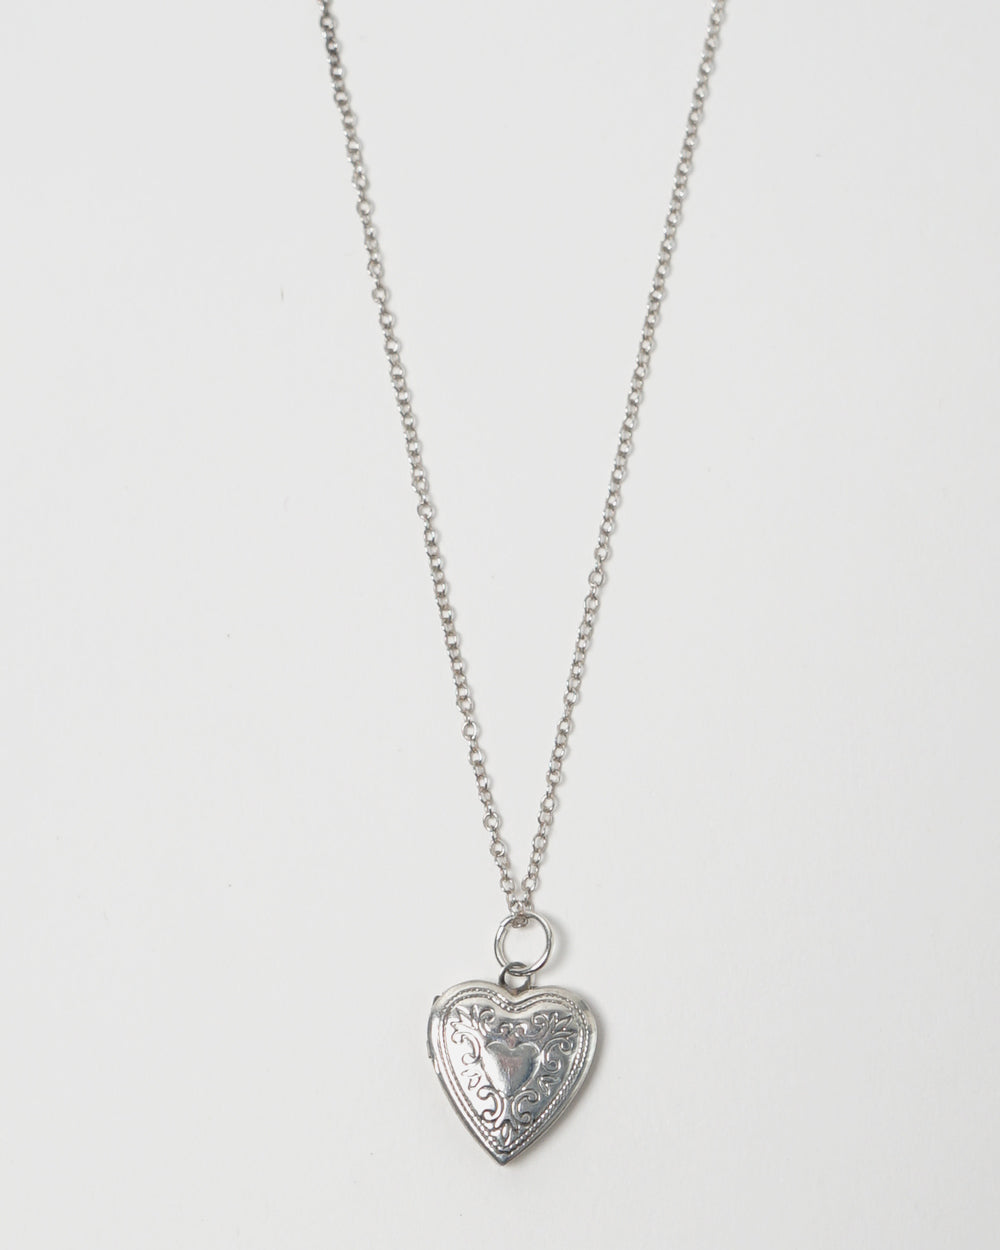 Silver Chain Necklace w/ Heart Locket Charm